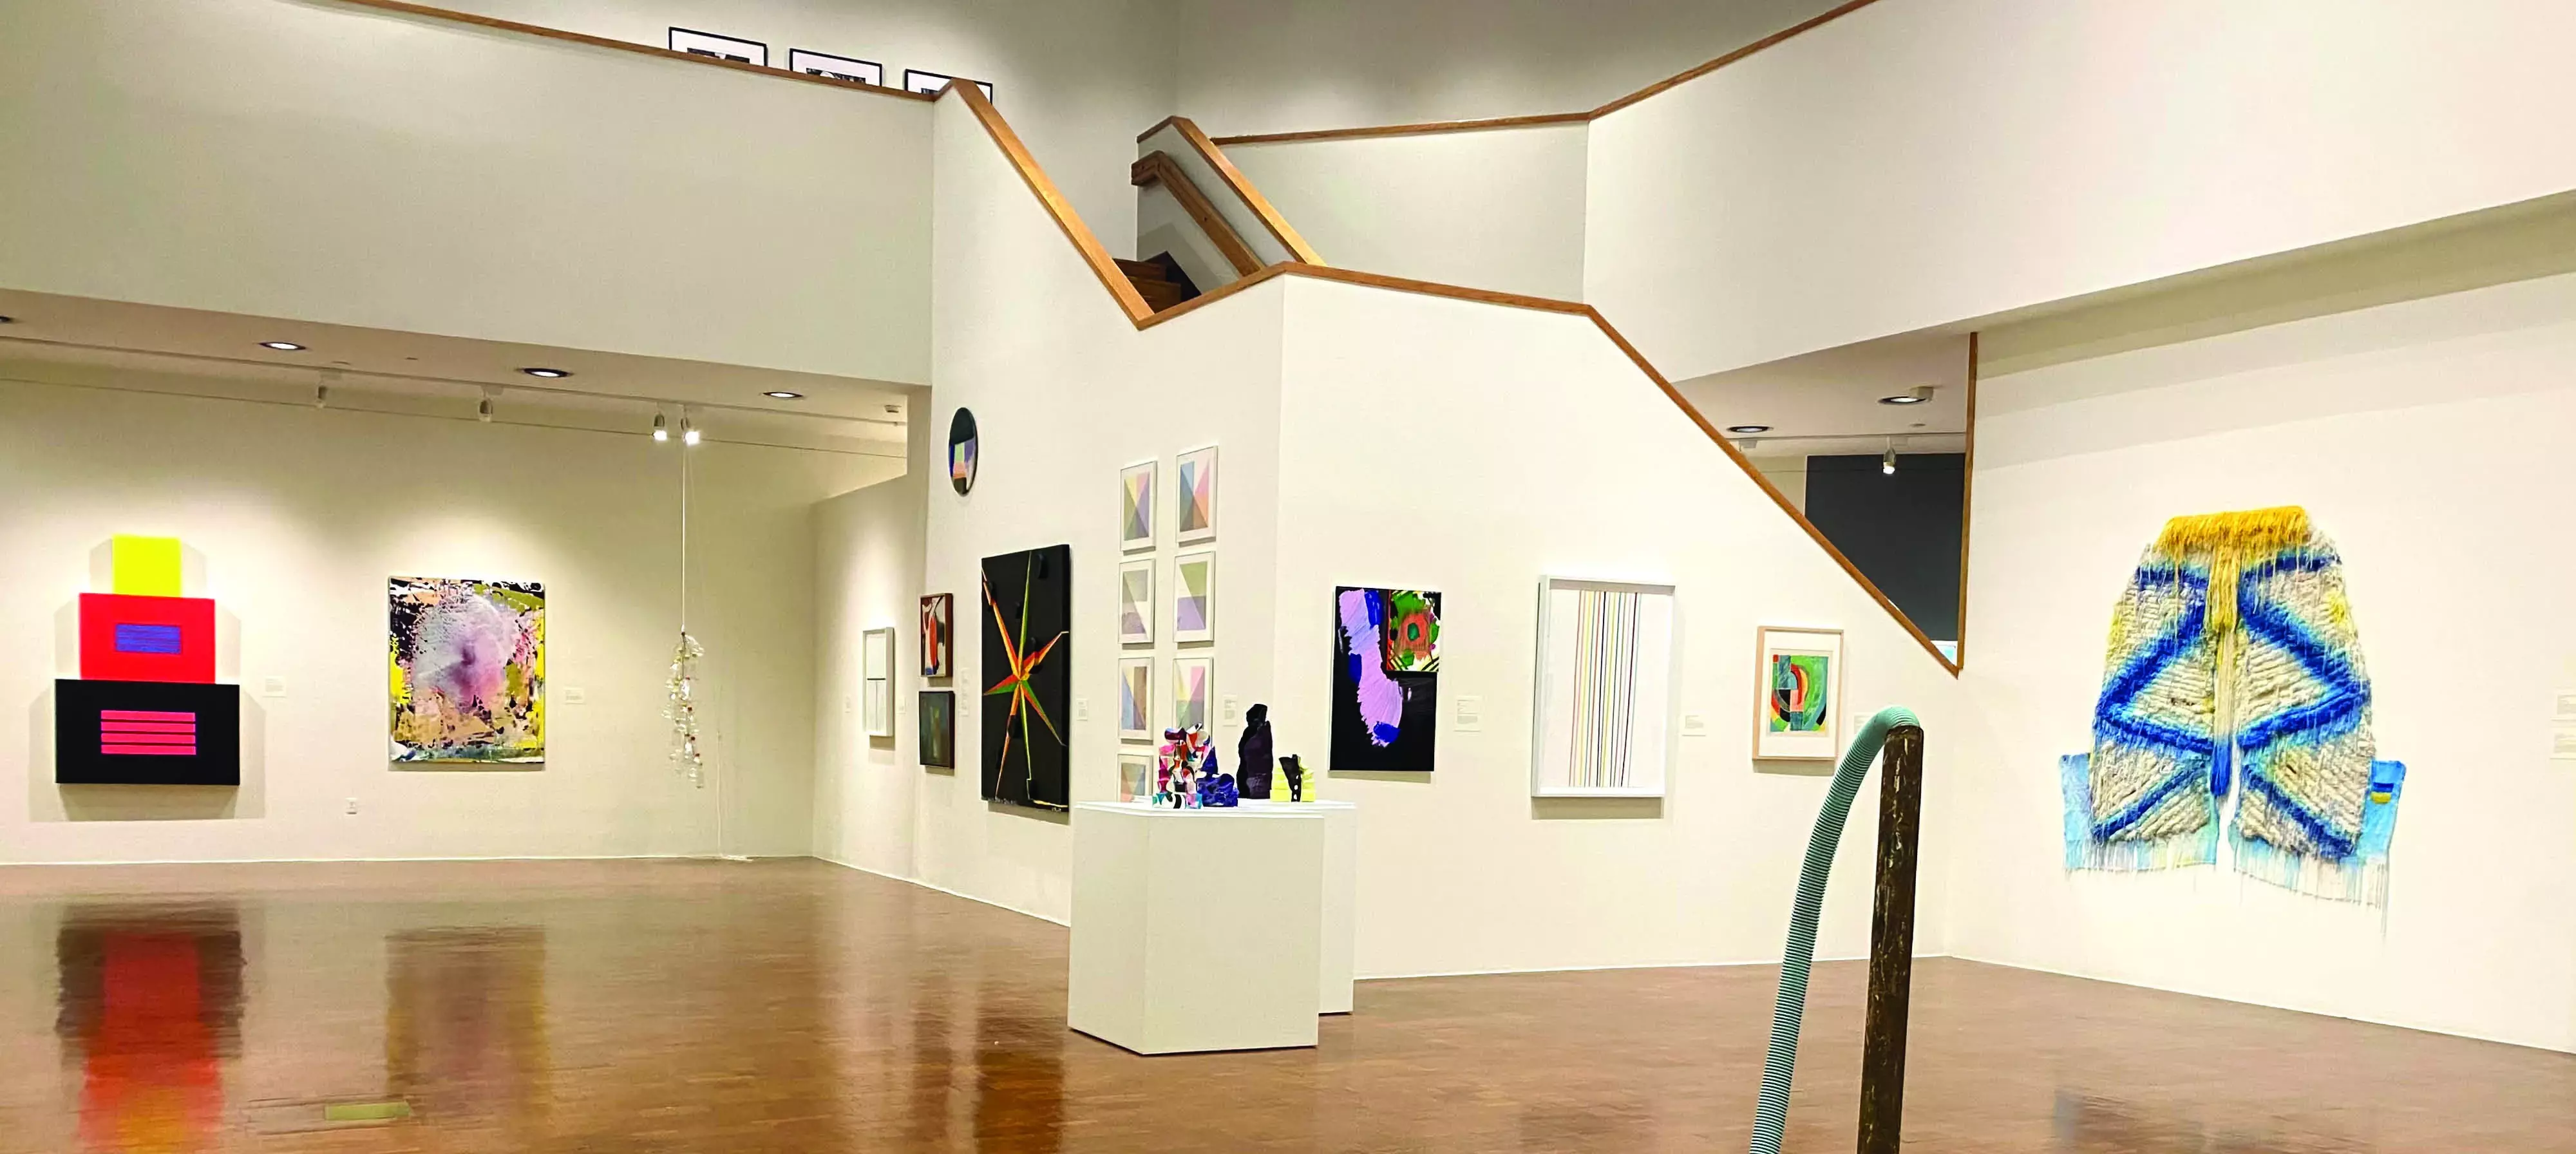 Exhibition in Museum gallery